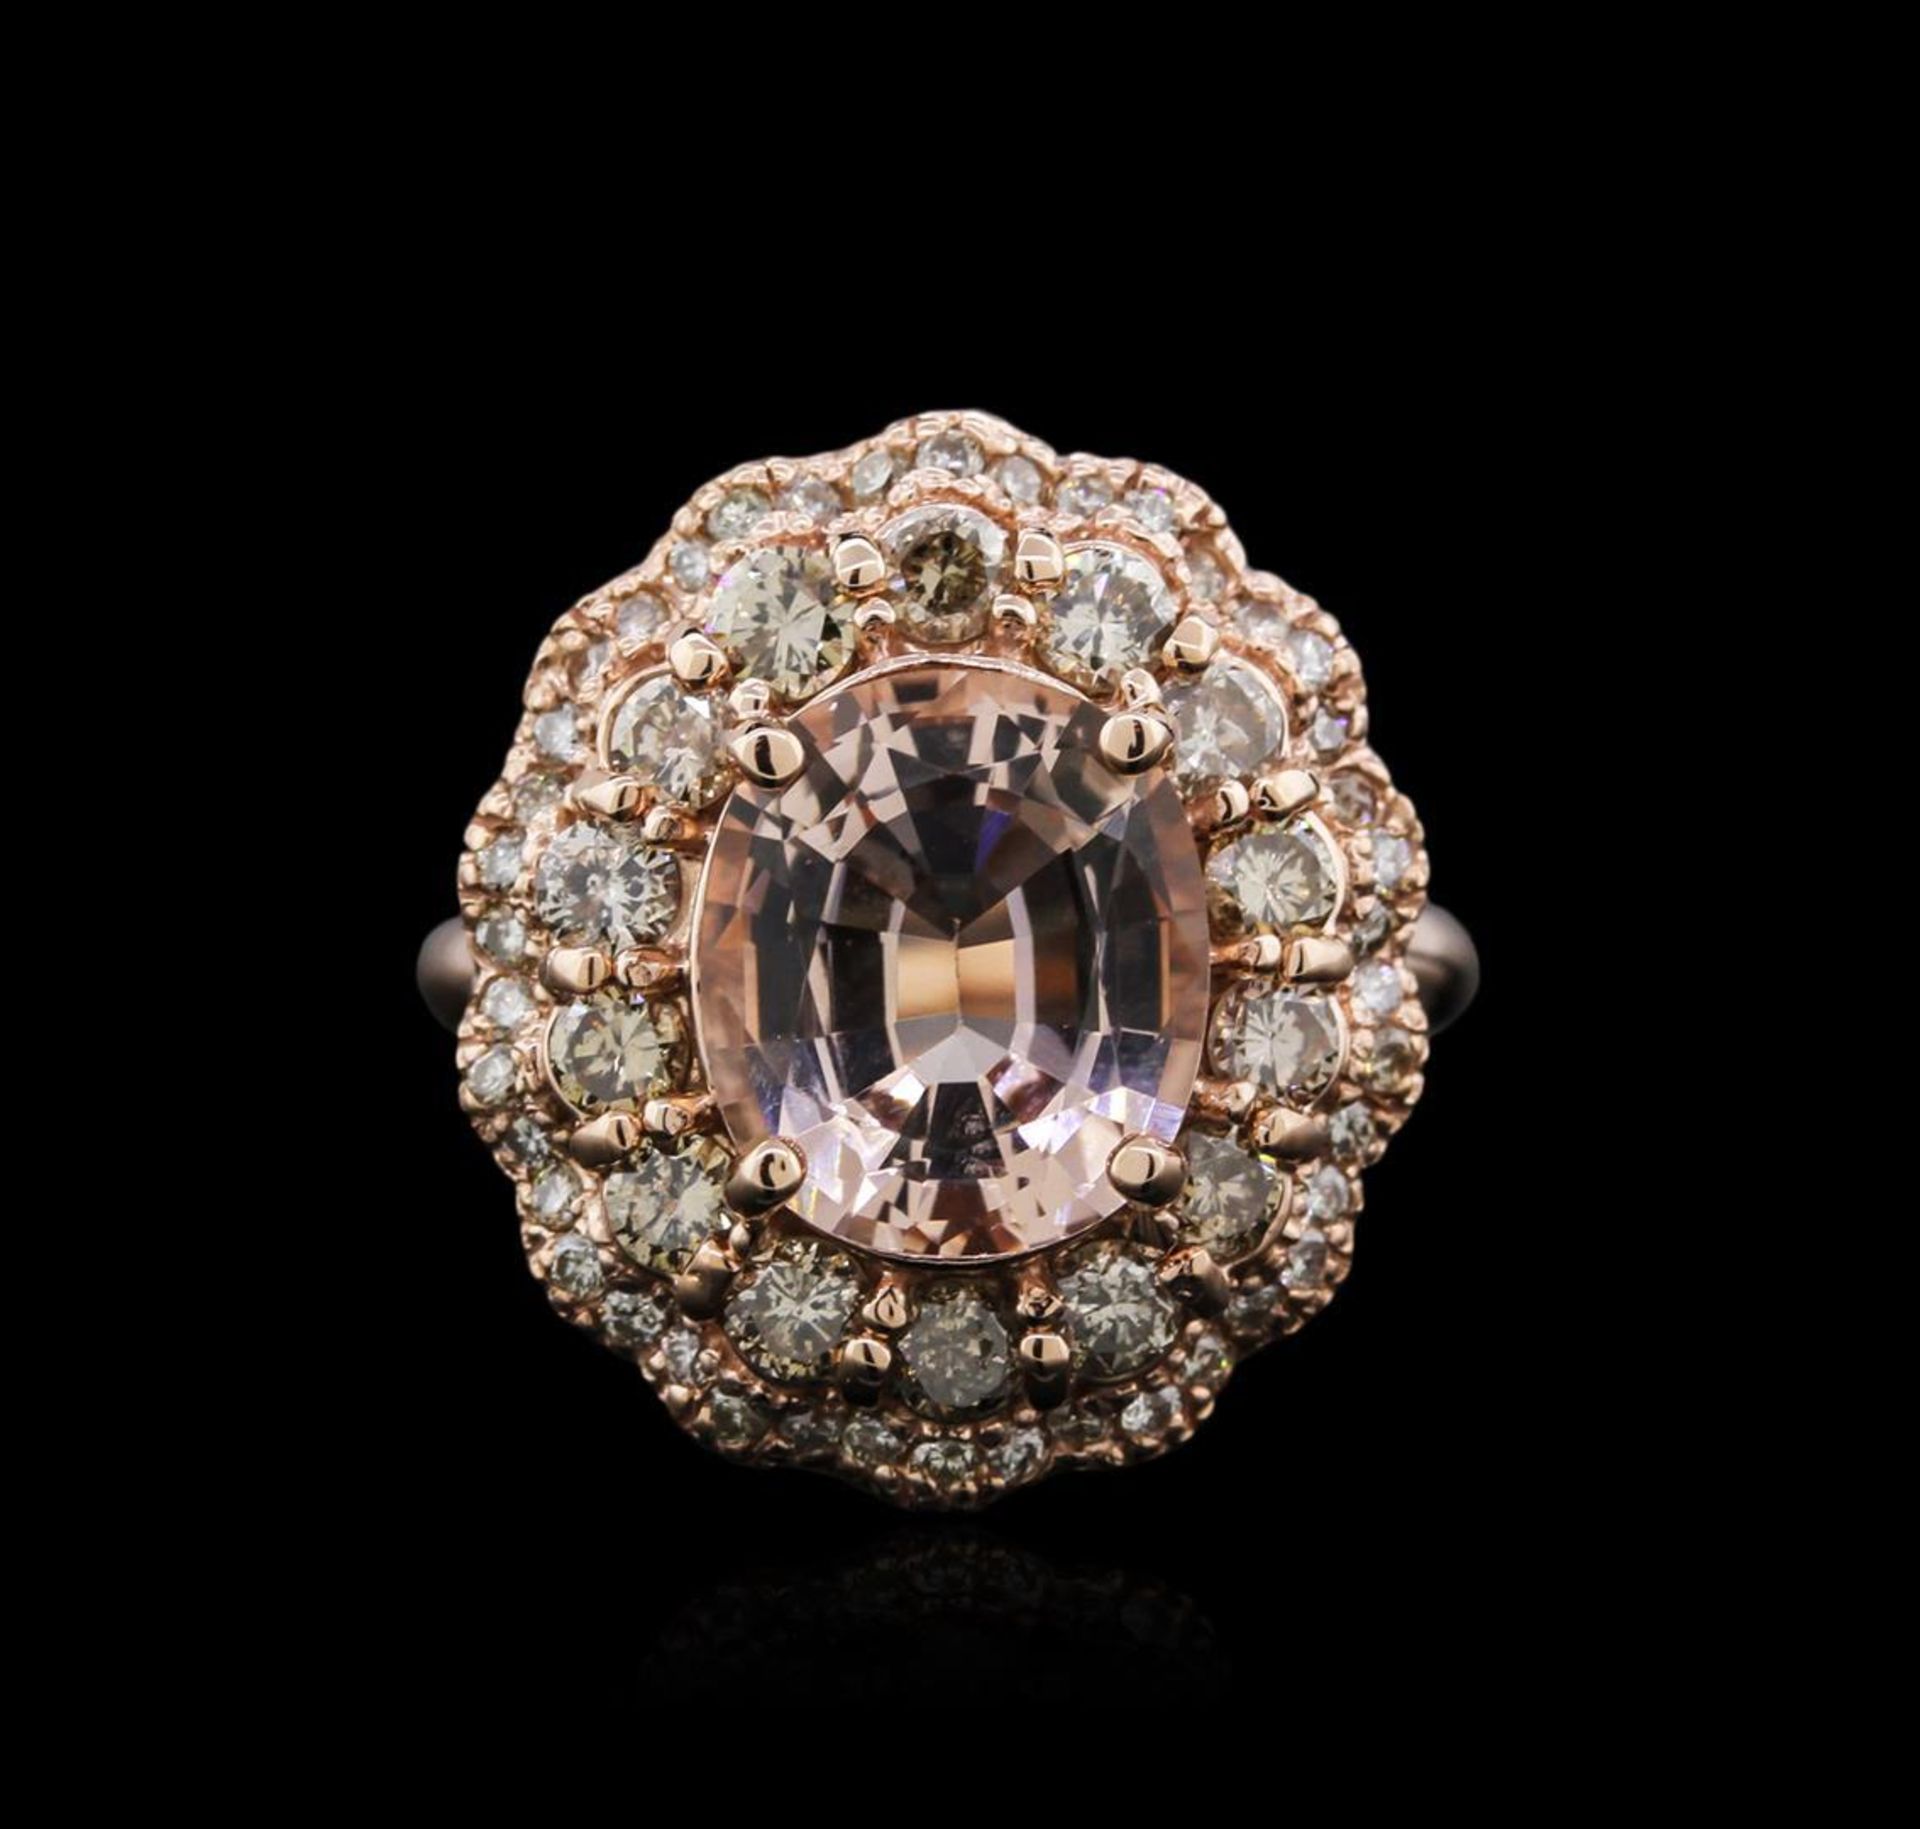 14KT Rose Gold 3.13 ctw Morganite and Diamond Ring - Image 2 of 4